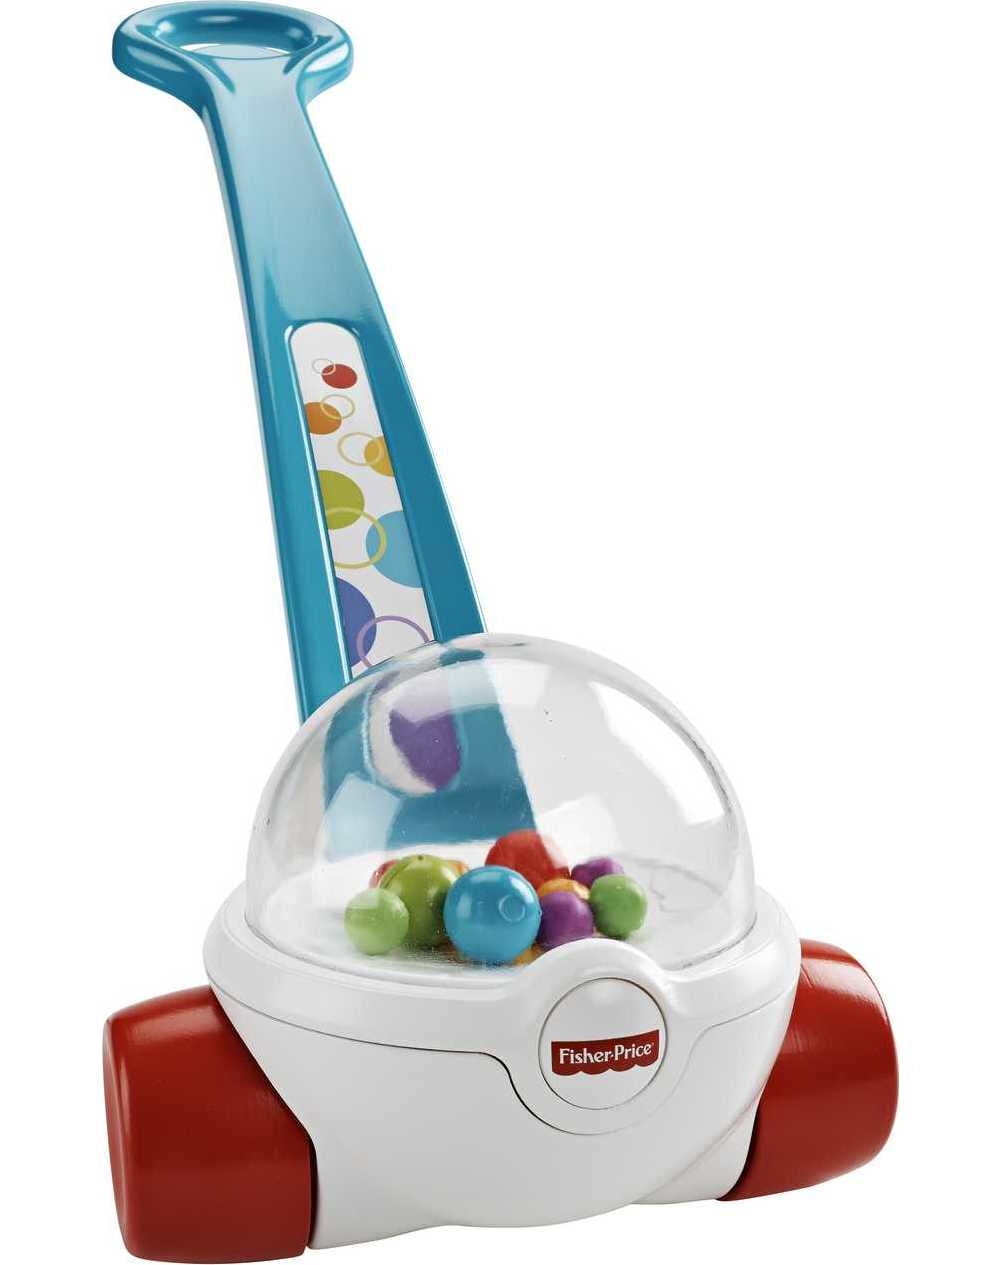 Brand New Fisher Price Bath Toys Smart Phones Musical mobile Stroller Activity 